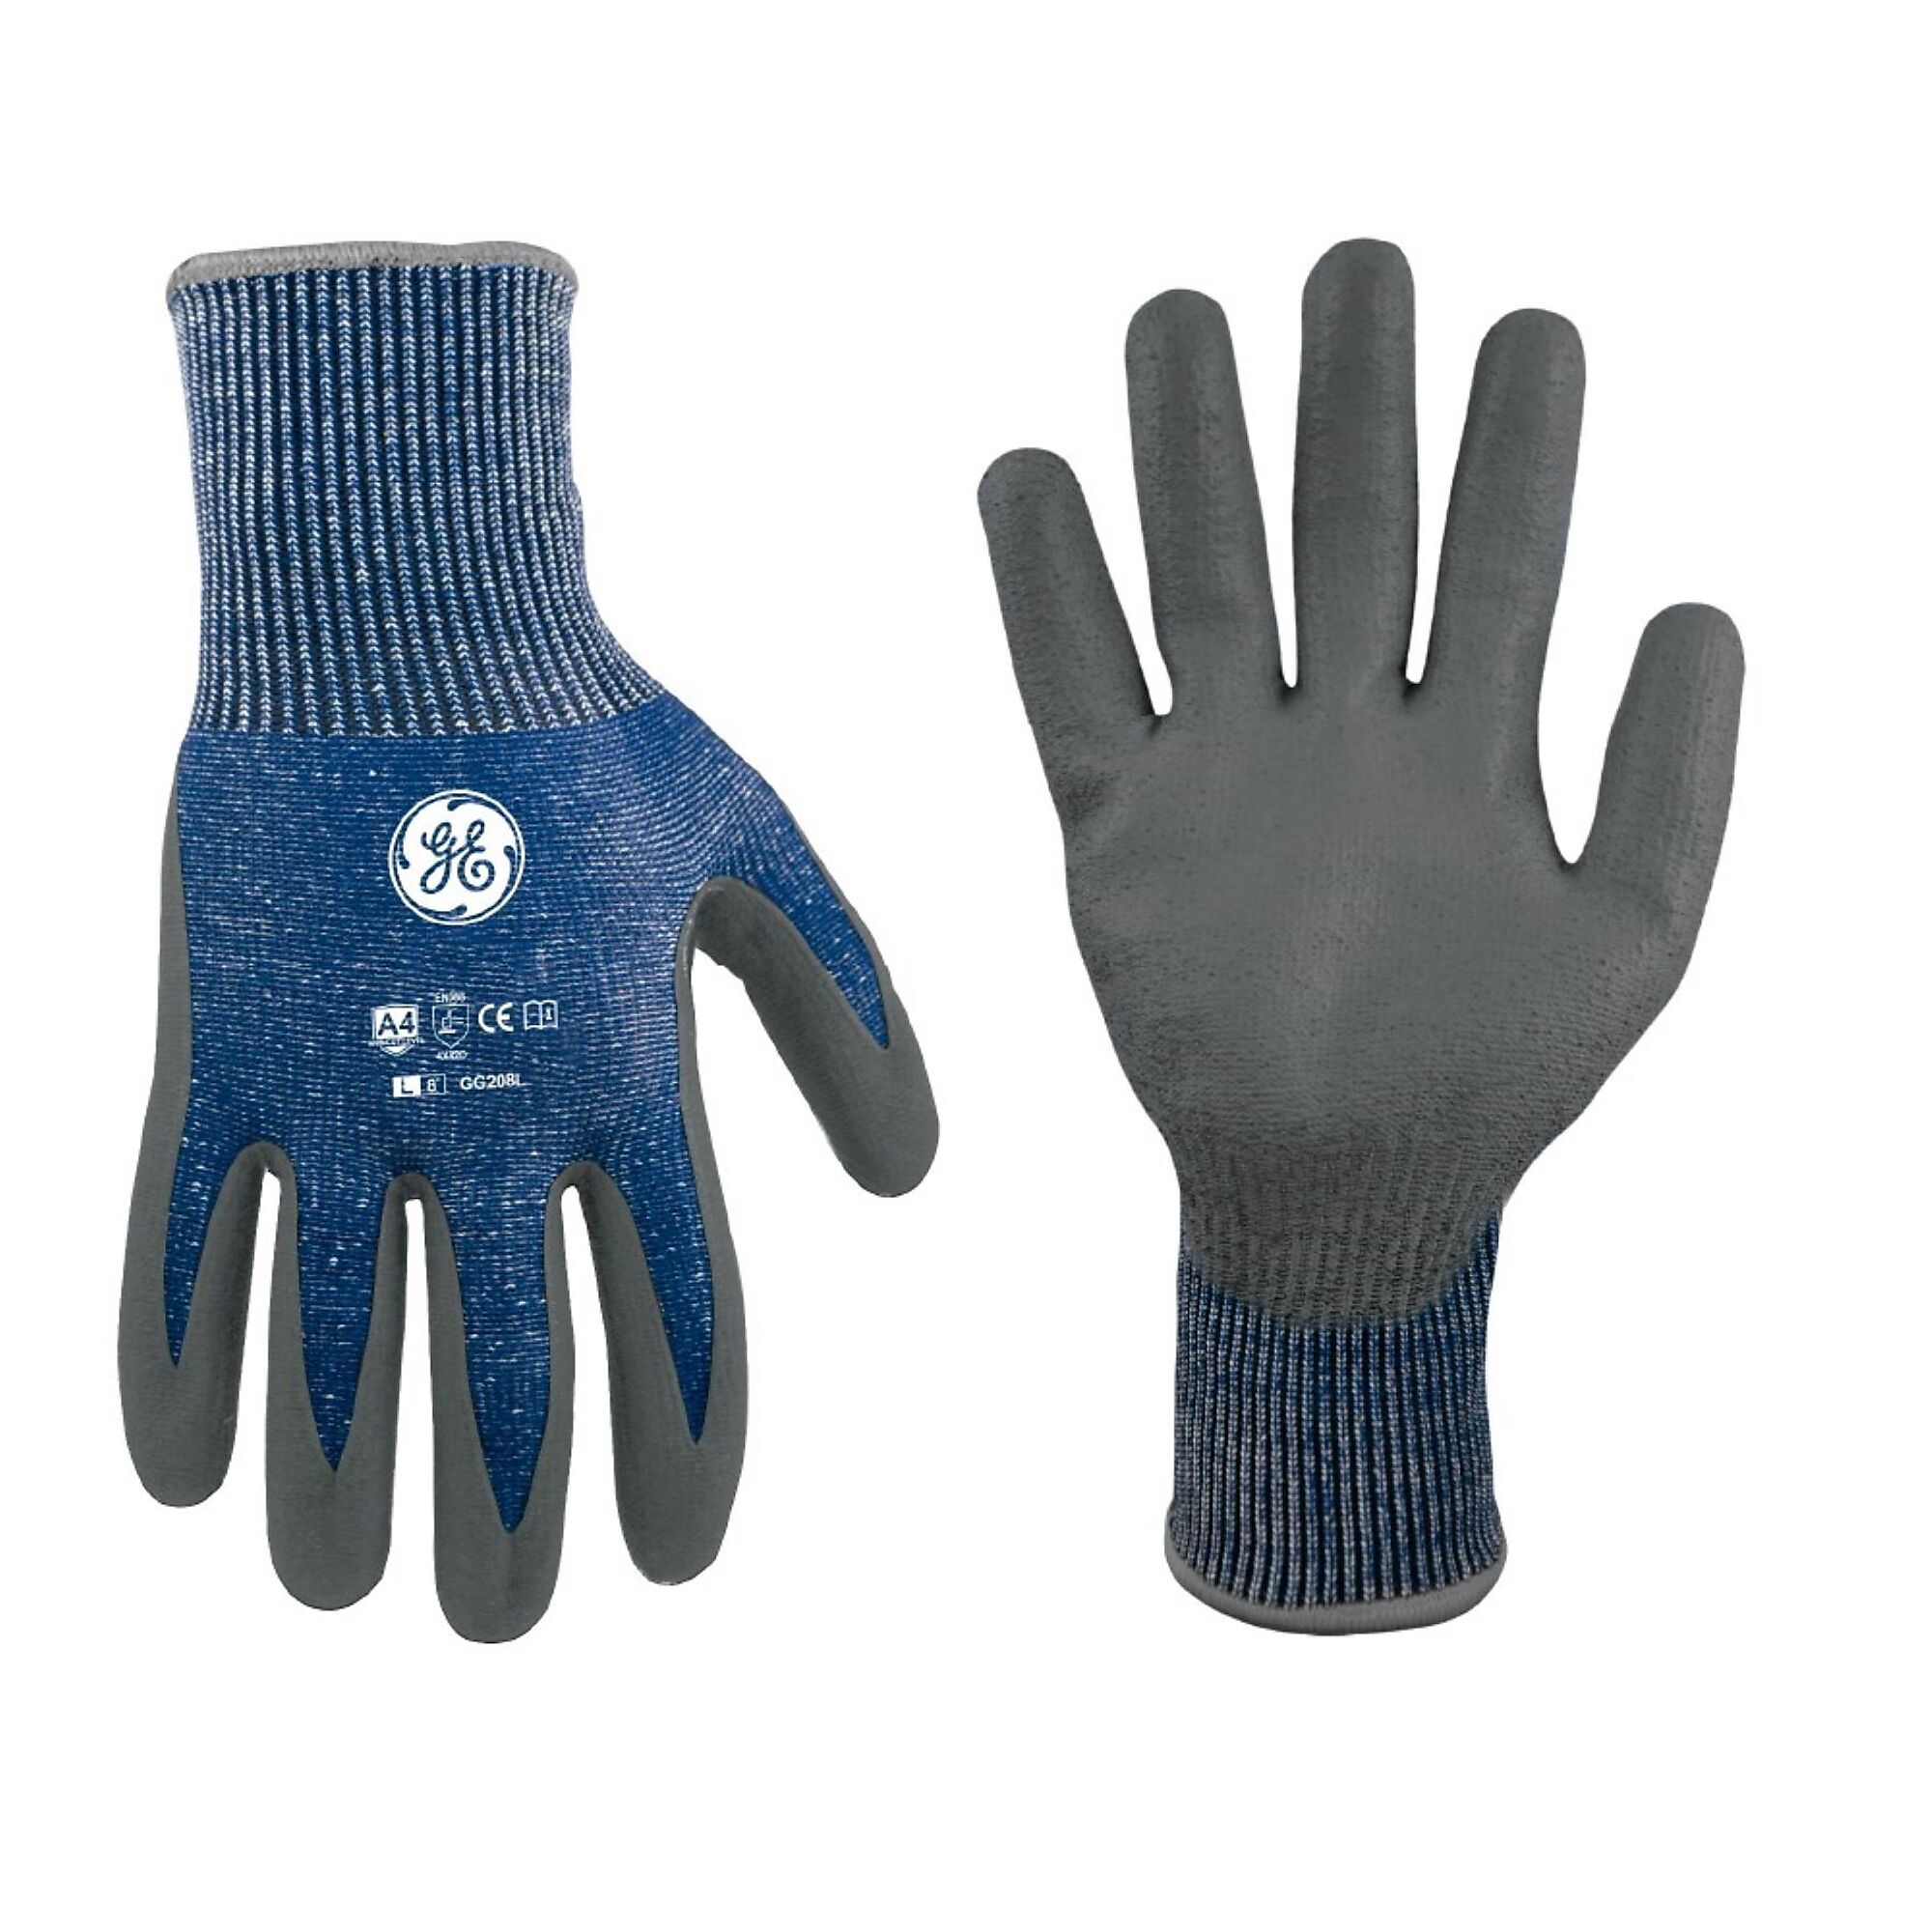 General Electric, Cut Resistant Gloves Blue/Gray L 12 pair, Size L, Color Gray, Included (qty.) 12 Model GG208L